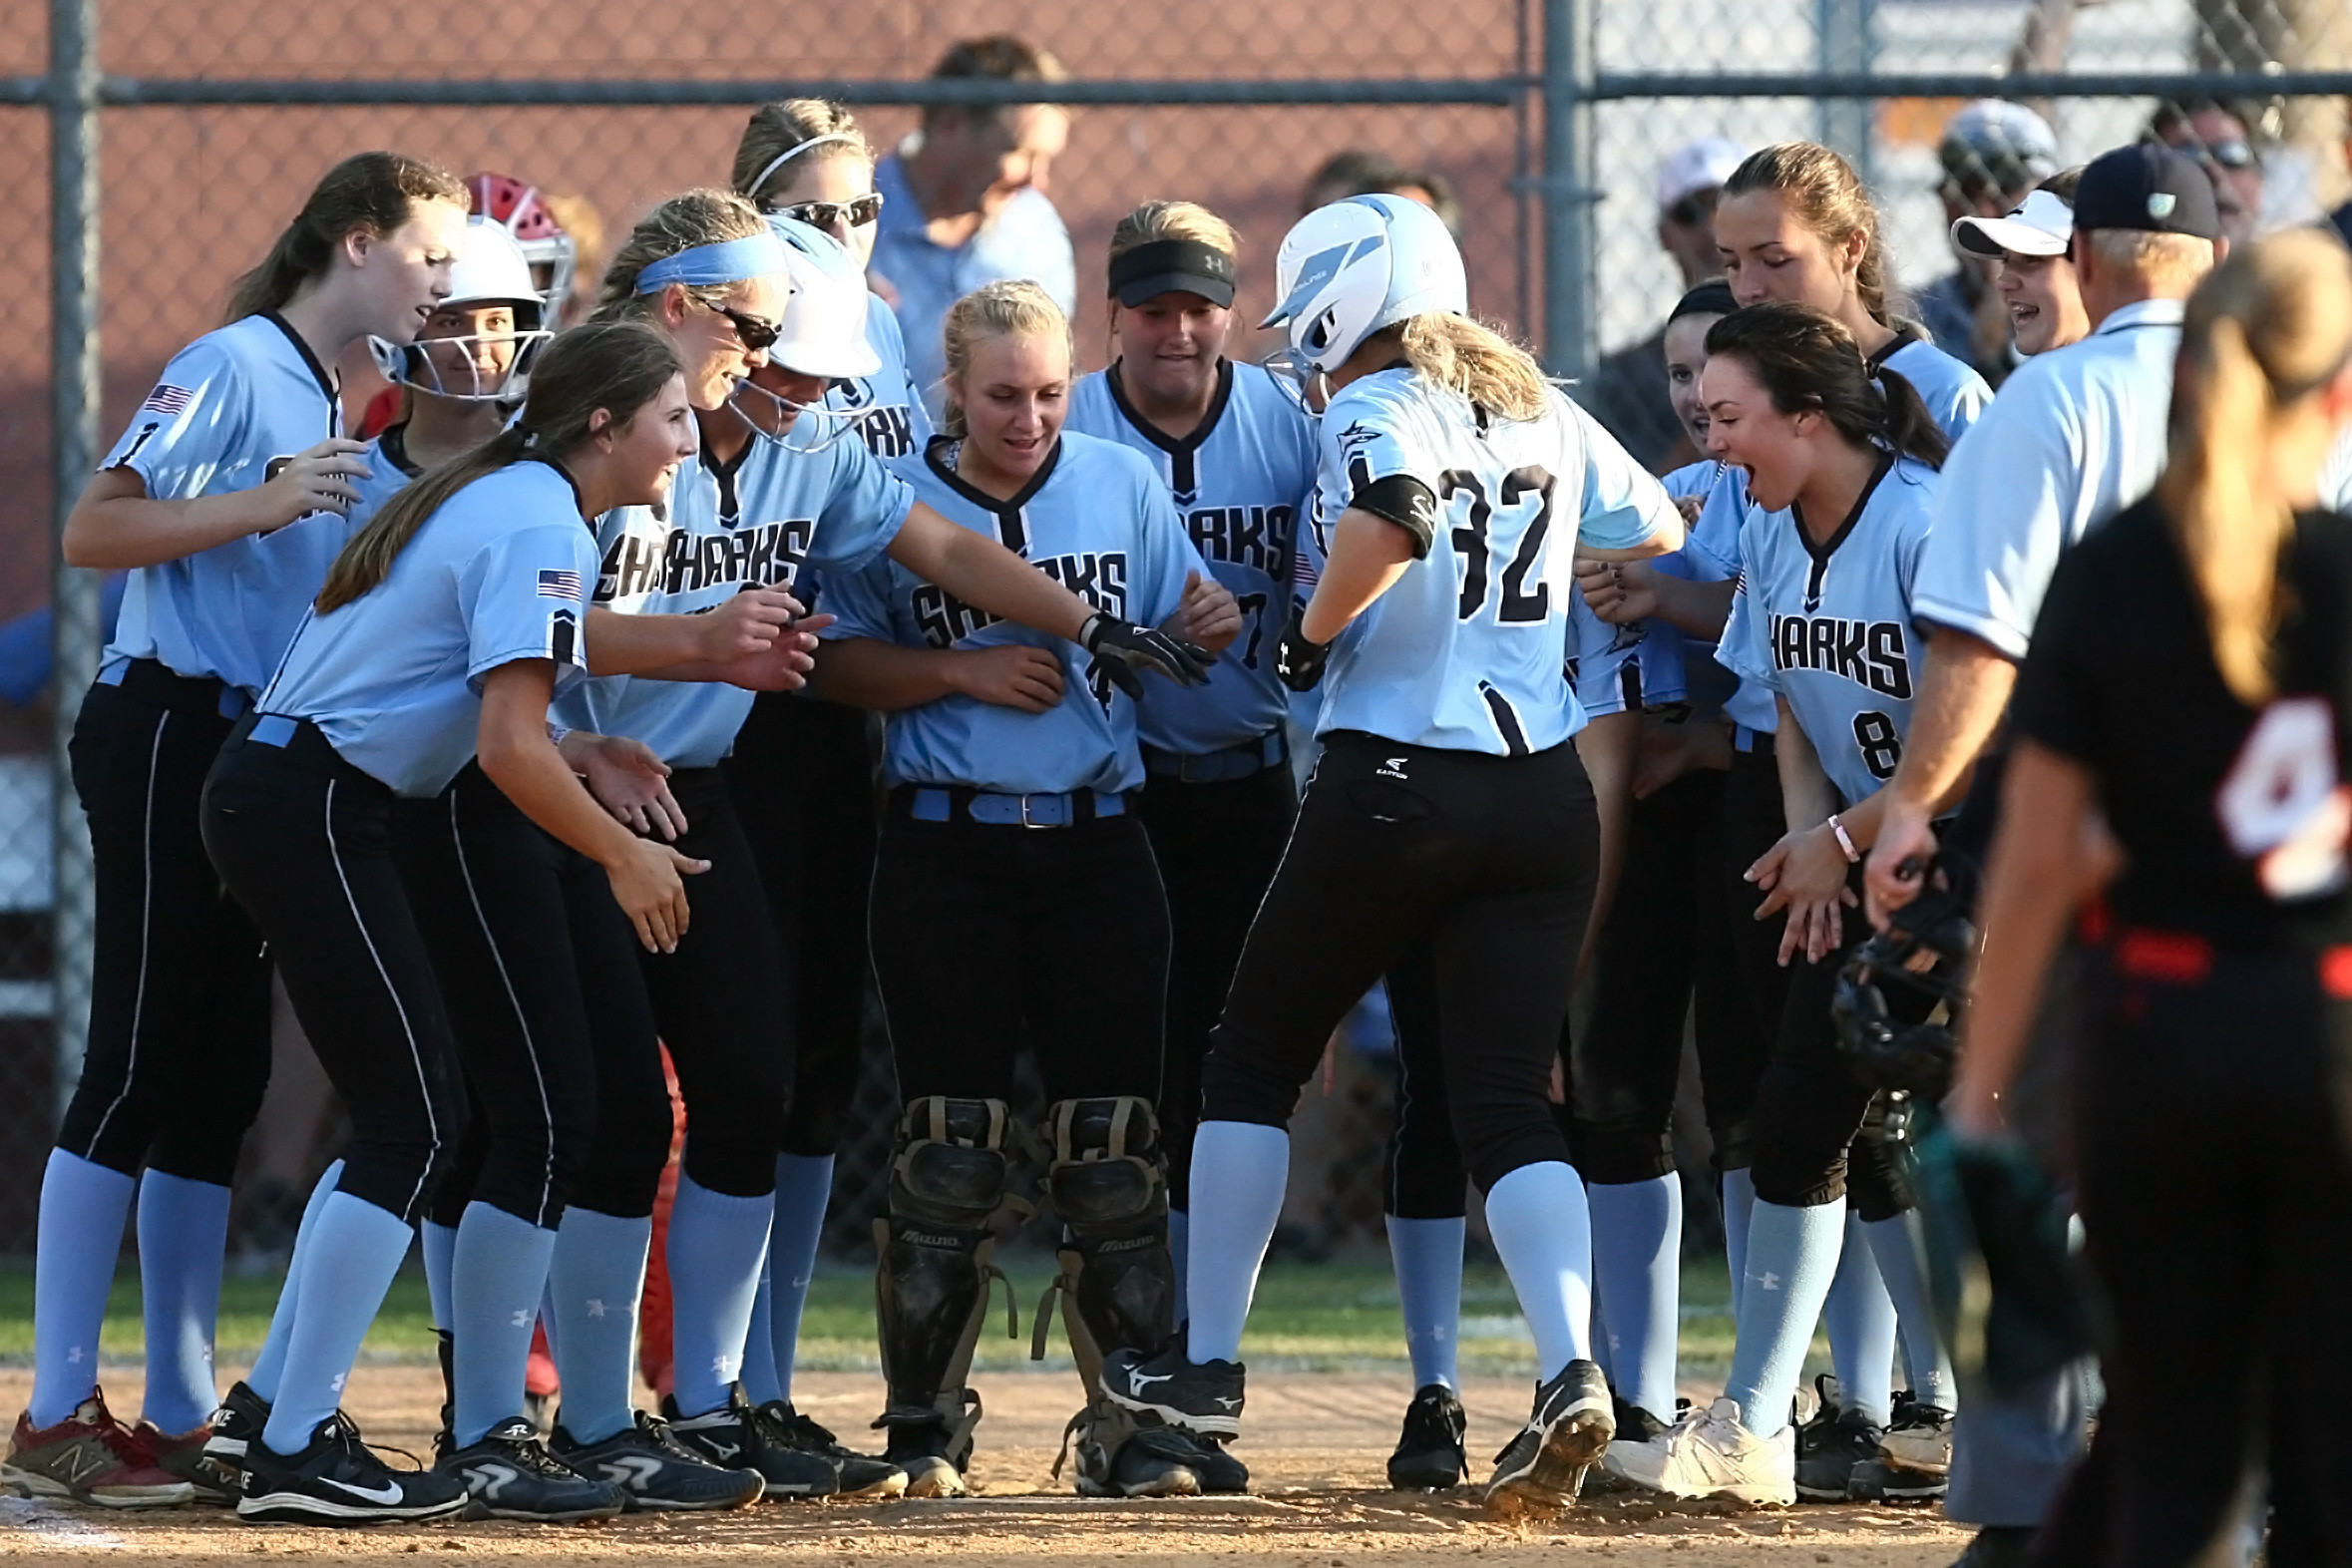 Sharks welcome #32 Farley Callaghan at the plate after her two-run home run.